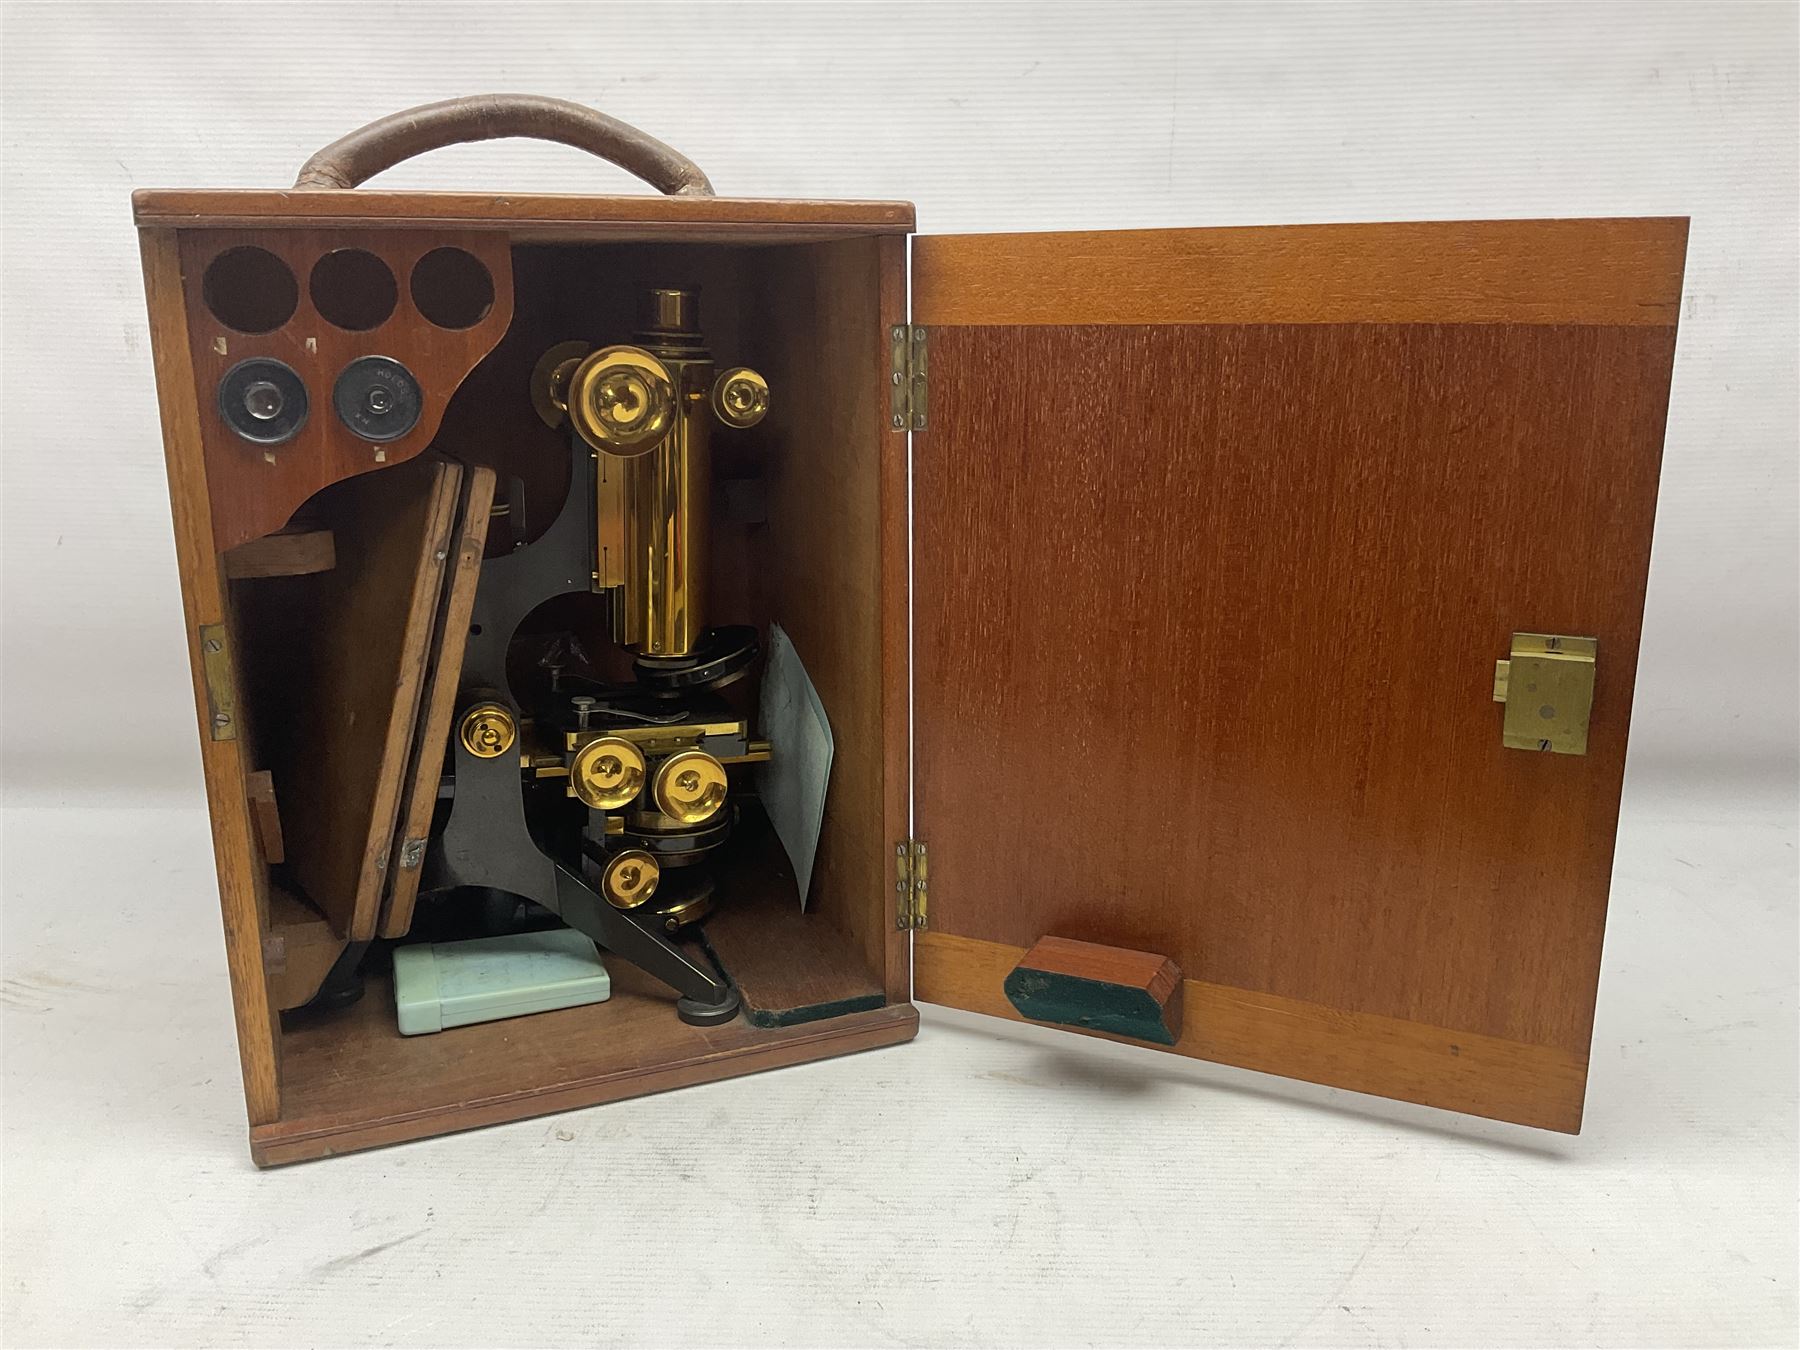 W. Watson & Sons Ltd lacquered brass compound microscope circa 1910 - Image 11 of 11